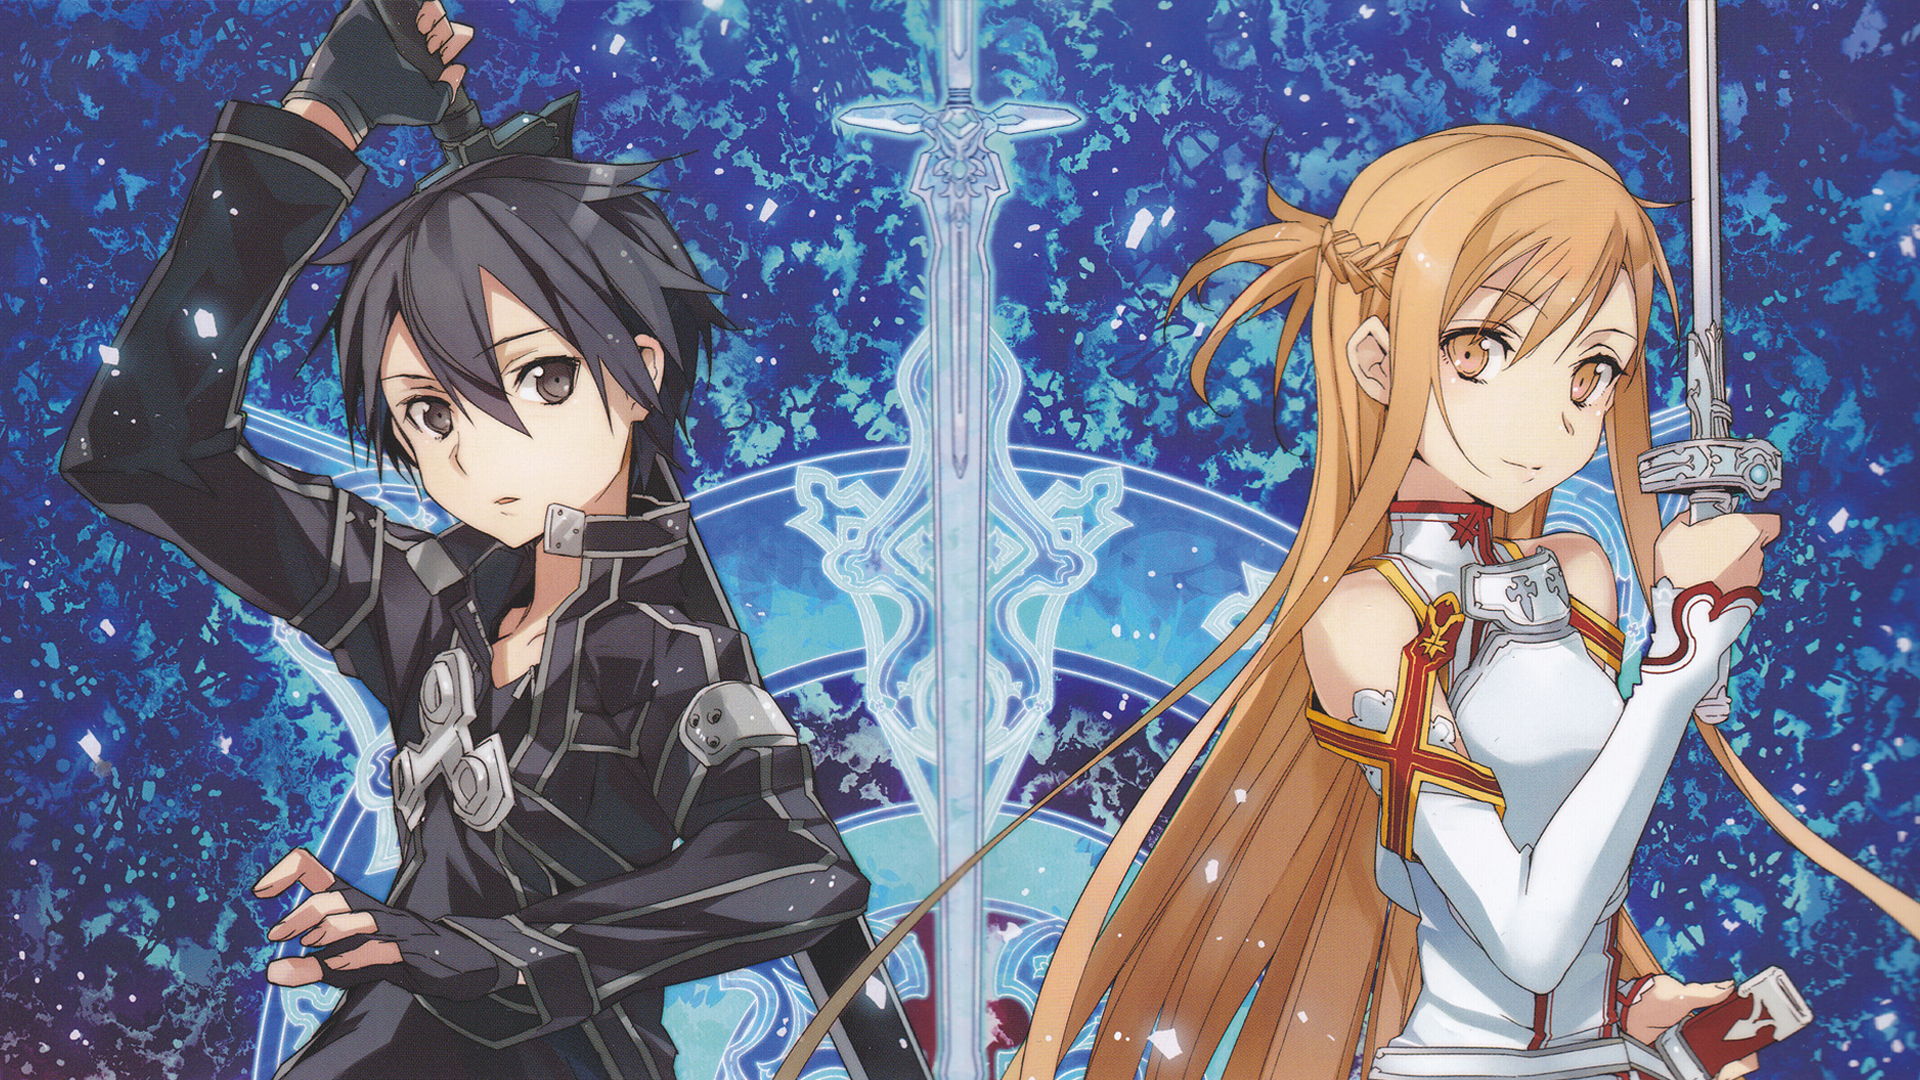 Are virtual reality massive multi-player games, like sword art online, really possible?